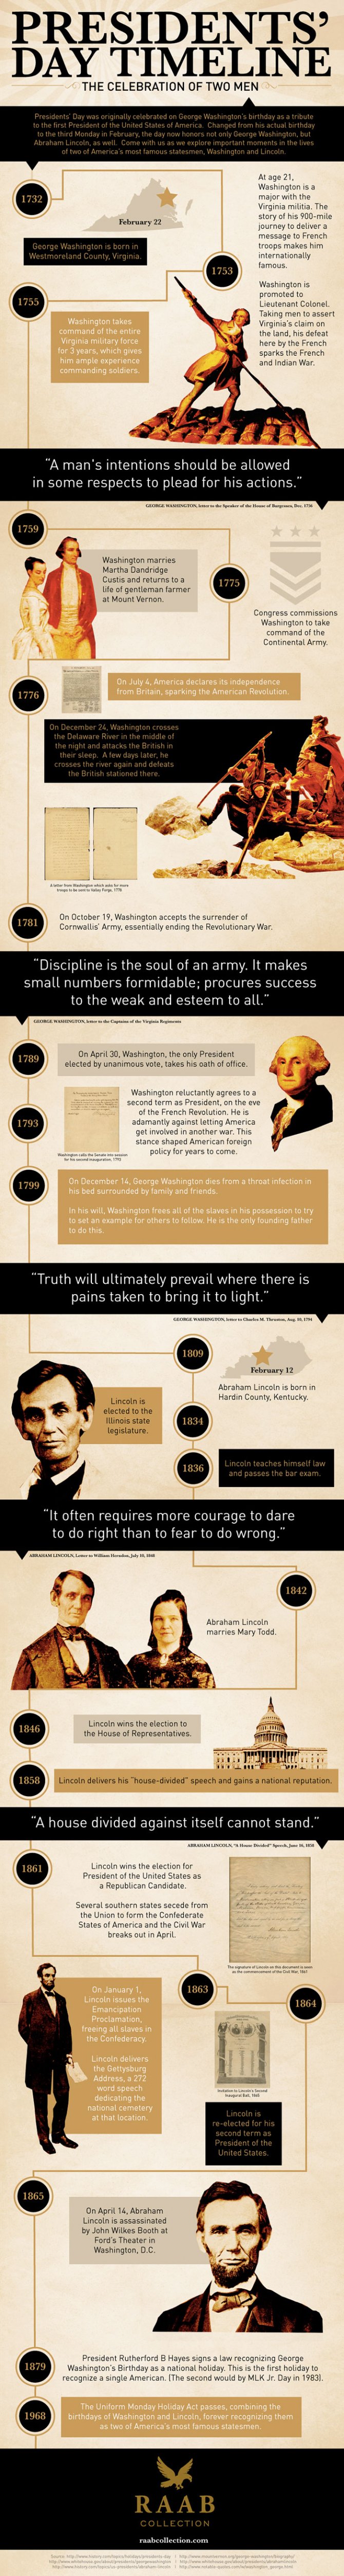 President’s Day Timeline Infographic by Raab Collection